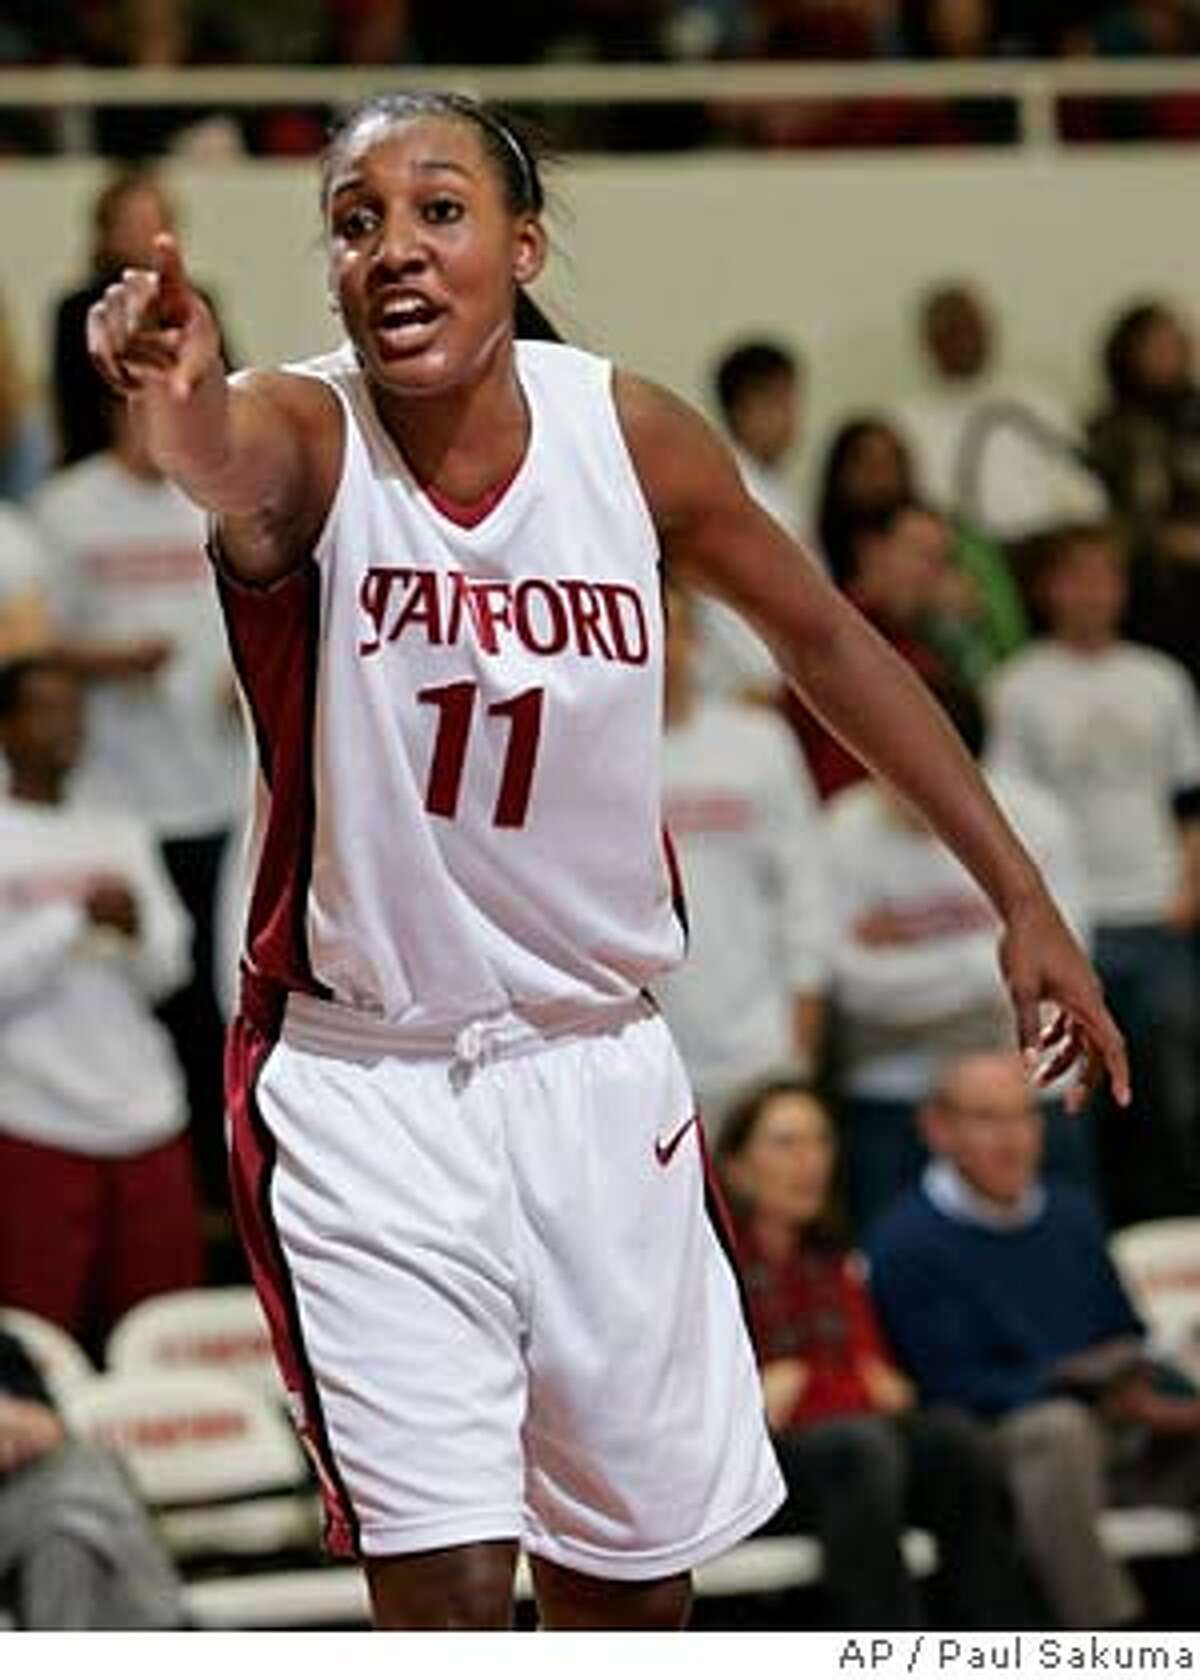 Stanford guard Candice Wiggins (11) points to teammates in the first half against BYU in the second round of the preseason Women's National Invitation basketball Tournament in Stanford, Calif., Monday, Nov. 13, 2006. (AP Photo/Paul Sakuma) Ran on: 11-14-2006 Stanfords Brooke Smith, like the rest of her teammates, found BYU and Dani Kubik Wright (45) to be a roadblock. Ran on: 11-14-2006 Stanfords J.J. Hones (10) and Jayne Appel cant believe what they are seeing in the final minute of the loss.